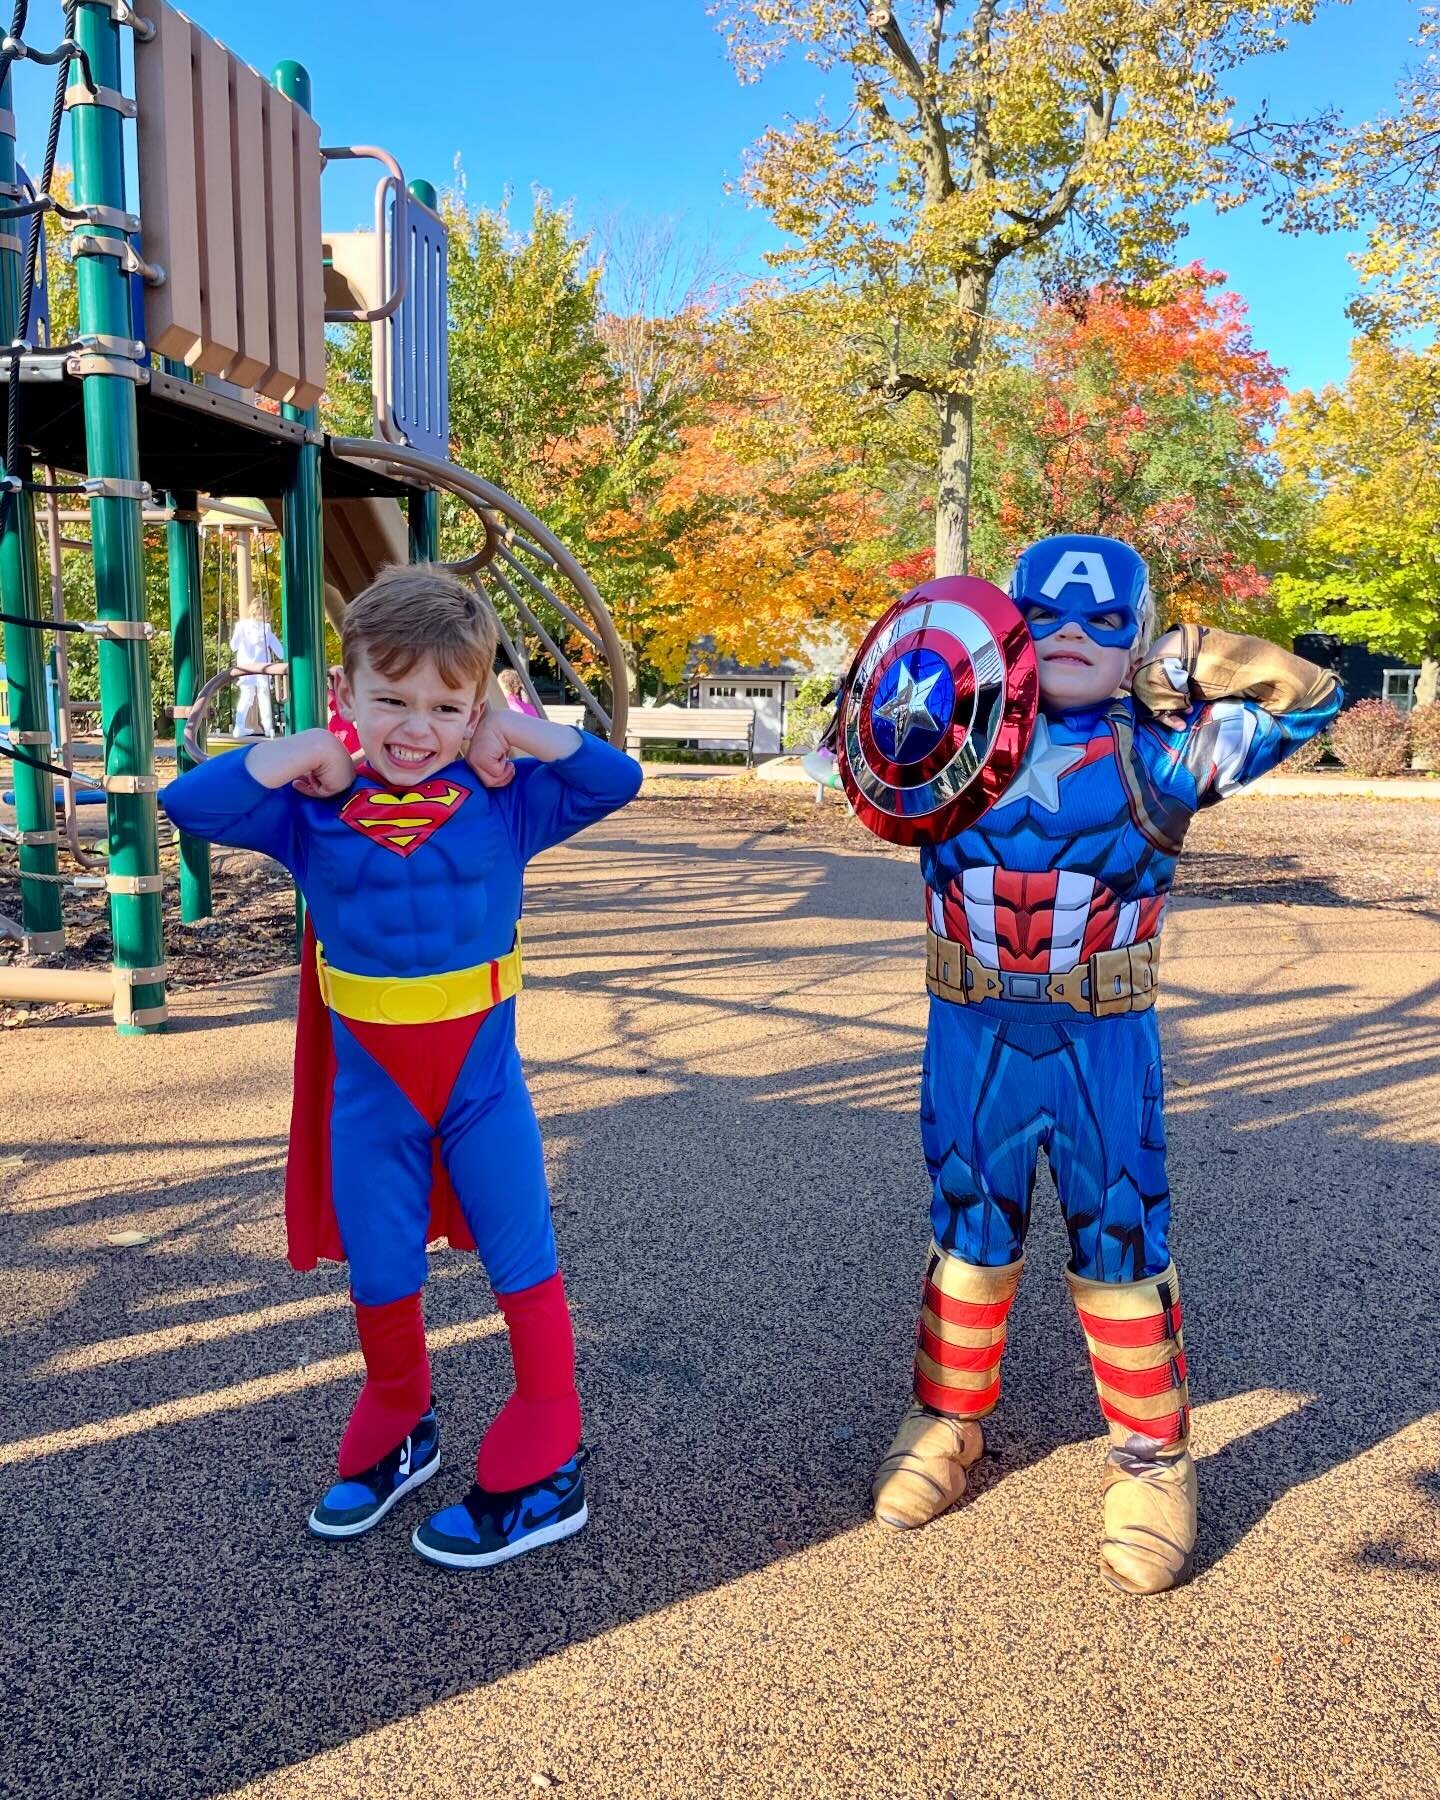 Happy Halloween, WCNS families! 👻 🎃 🧙 and a big thank you to all who helped organize the cutest costume play dates at the park!